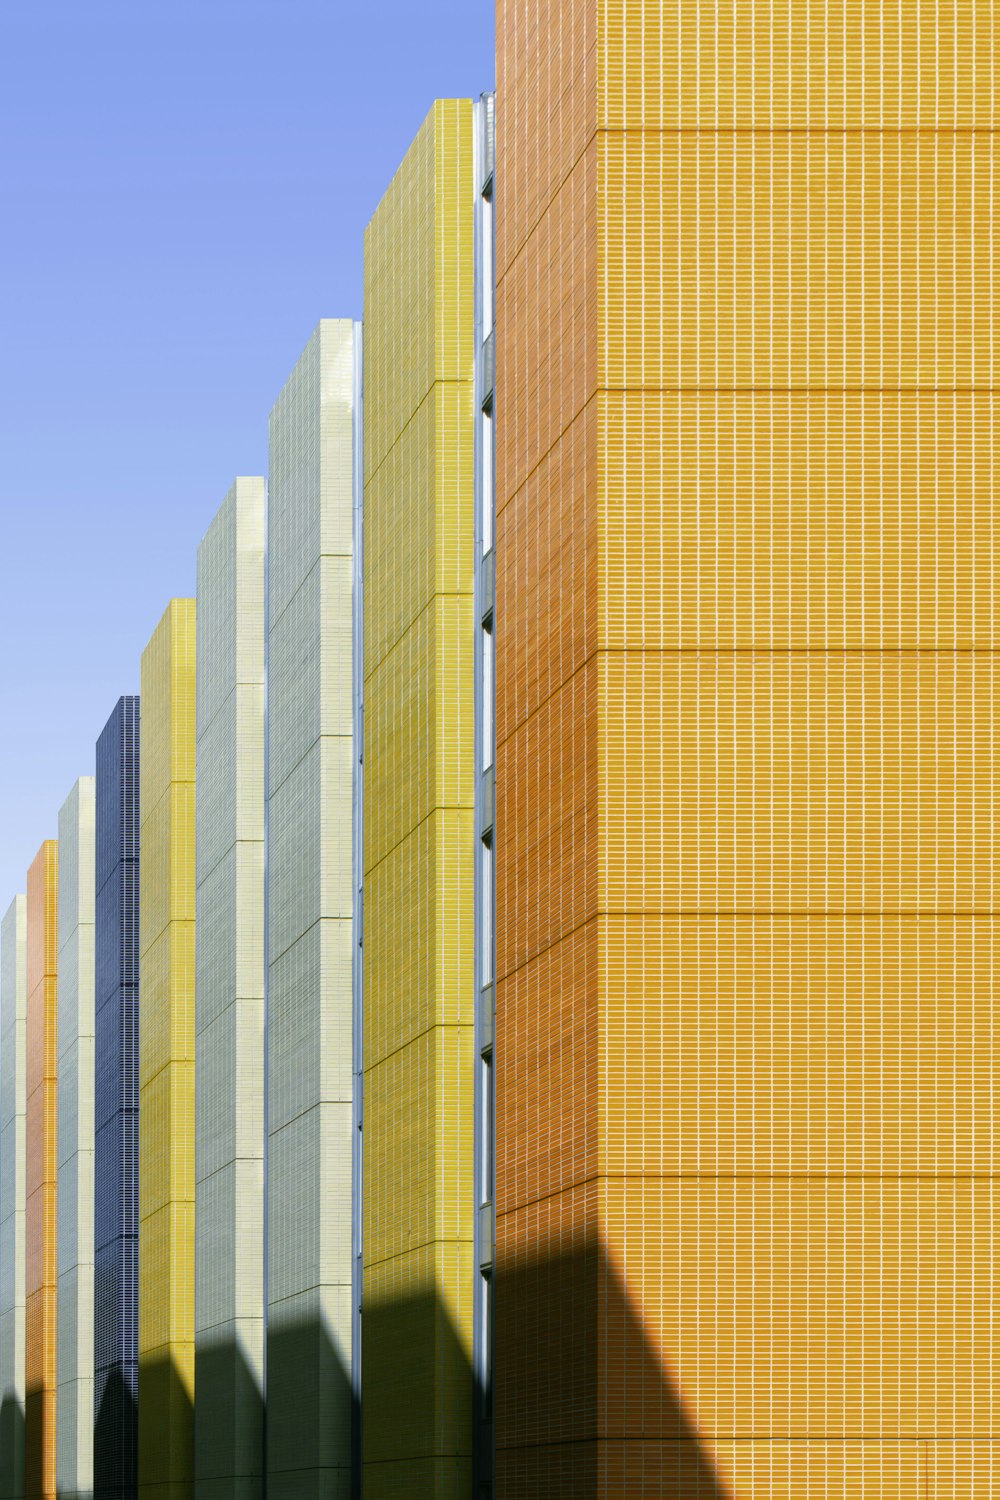 a row of yellow and grey buildings against a blue sky